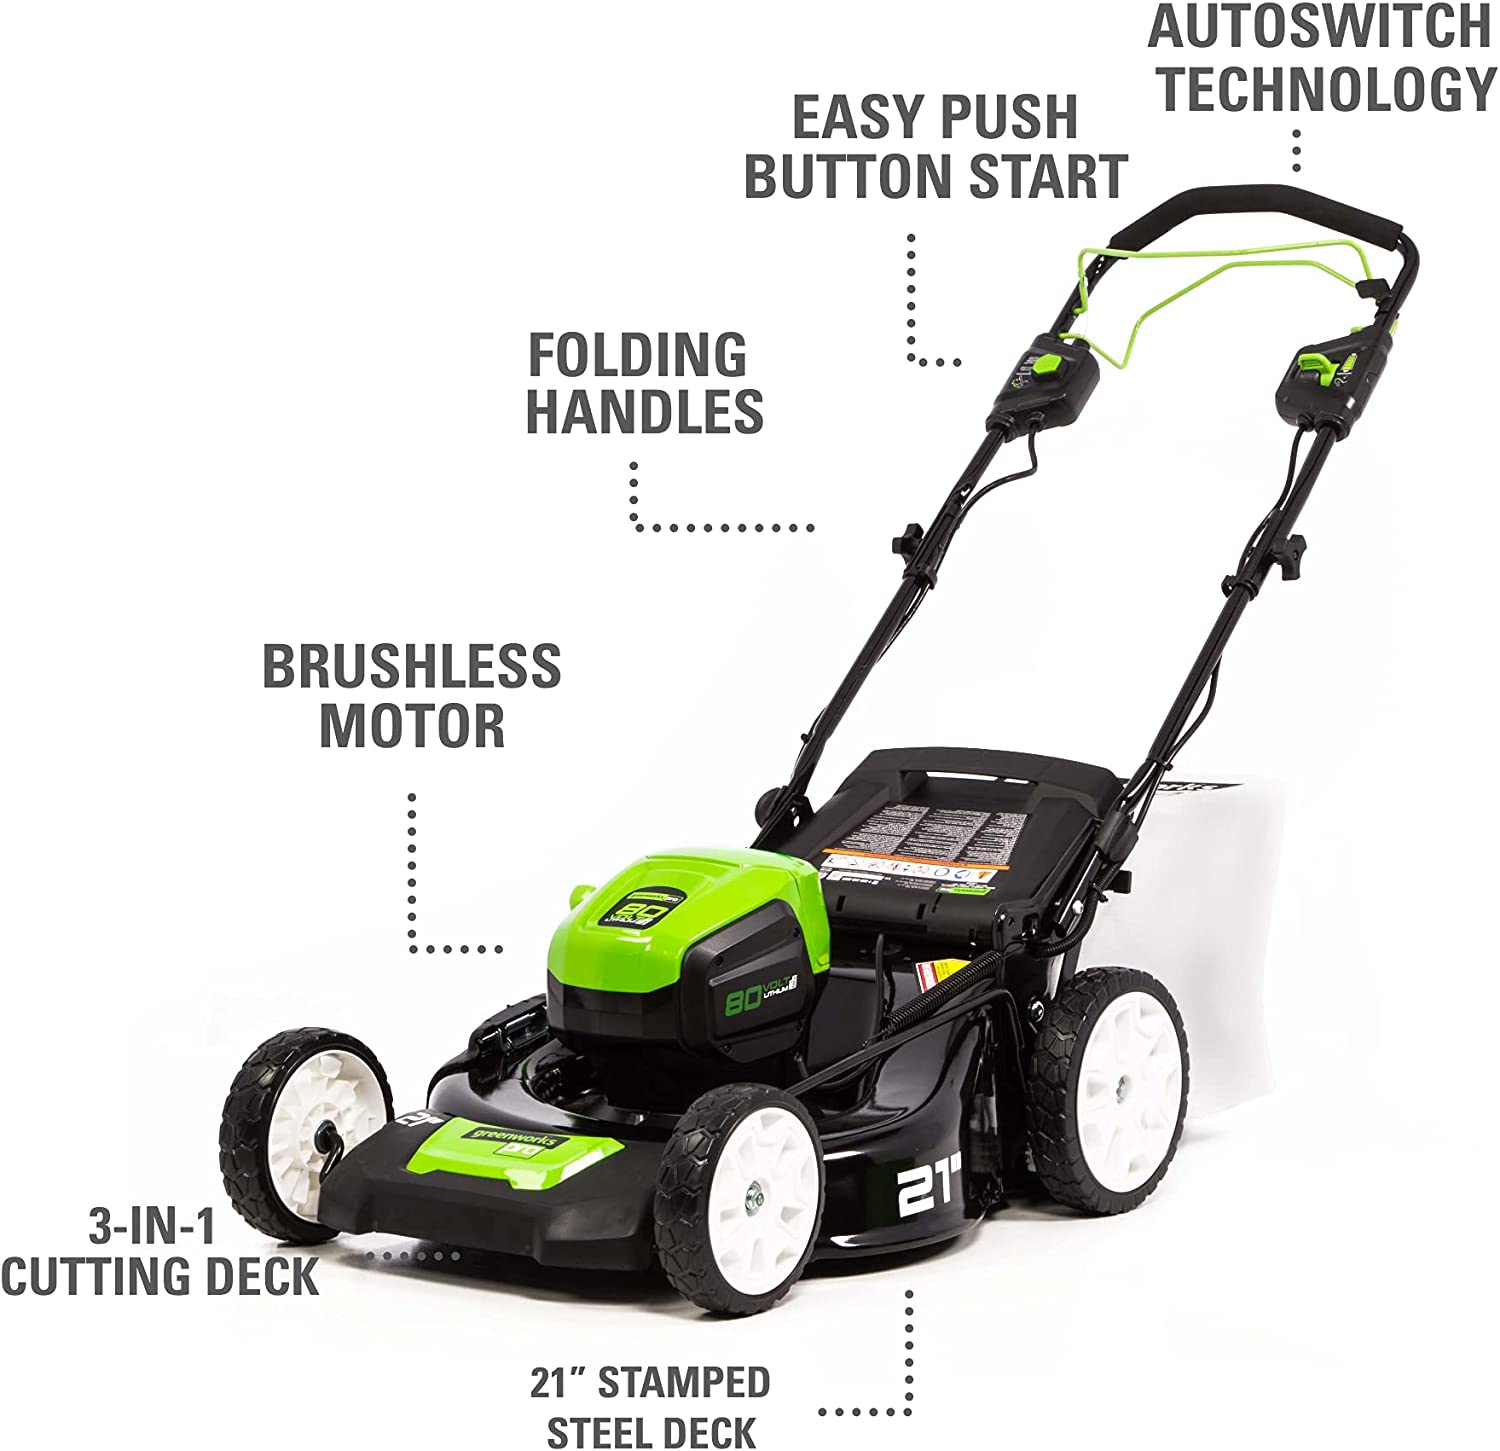 Greenworks Pro 21-Inch 80V Self-Propelled Cordless Lawn Mower, Tool-Only, MO80L00 $244